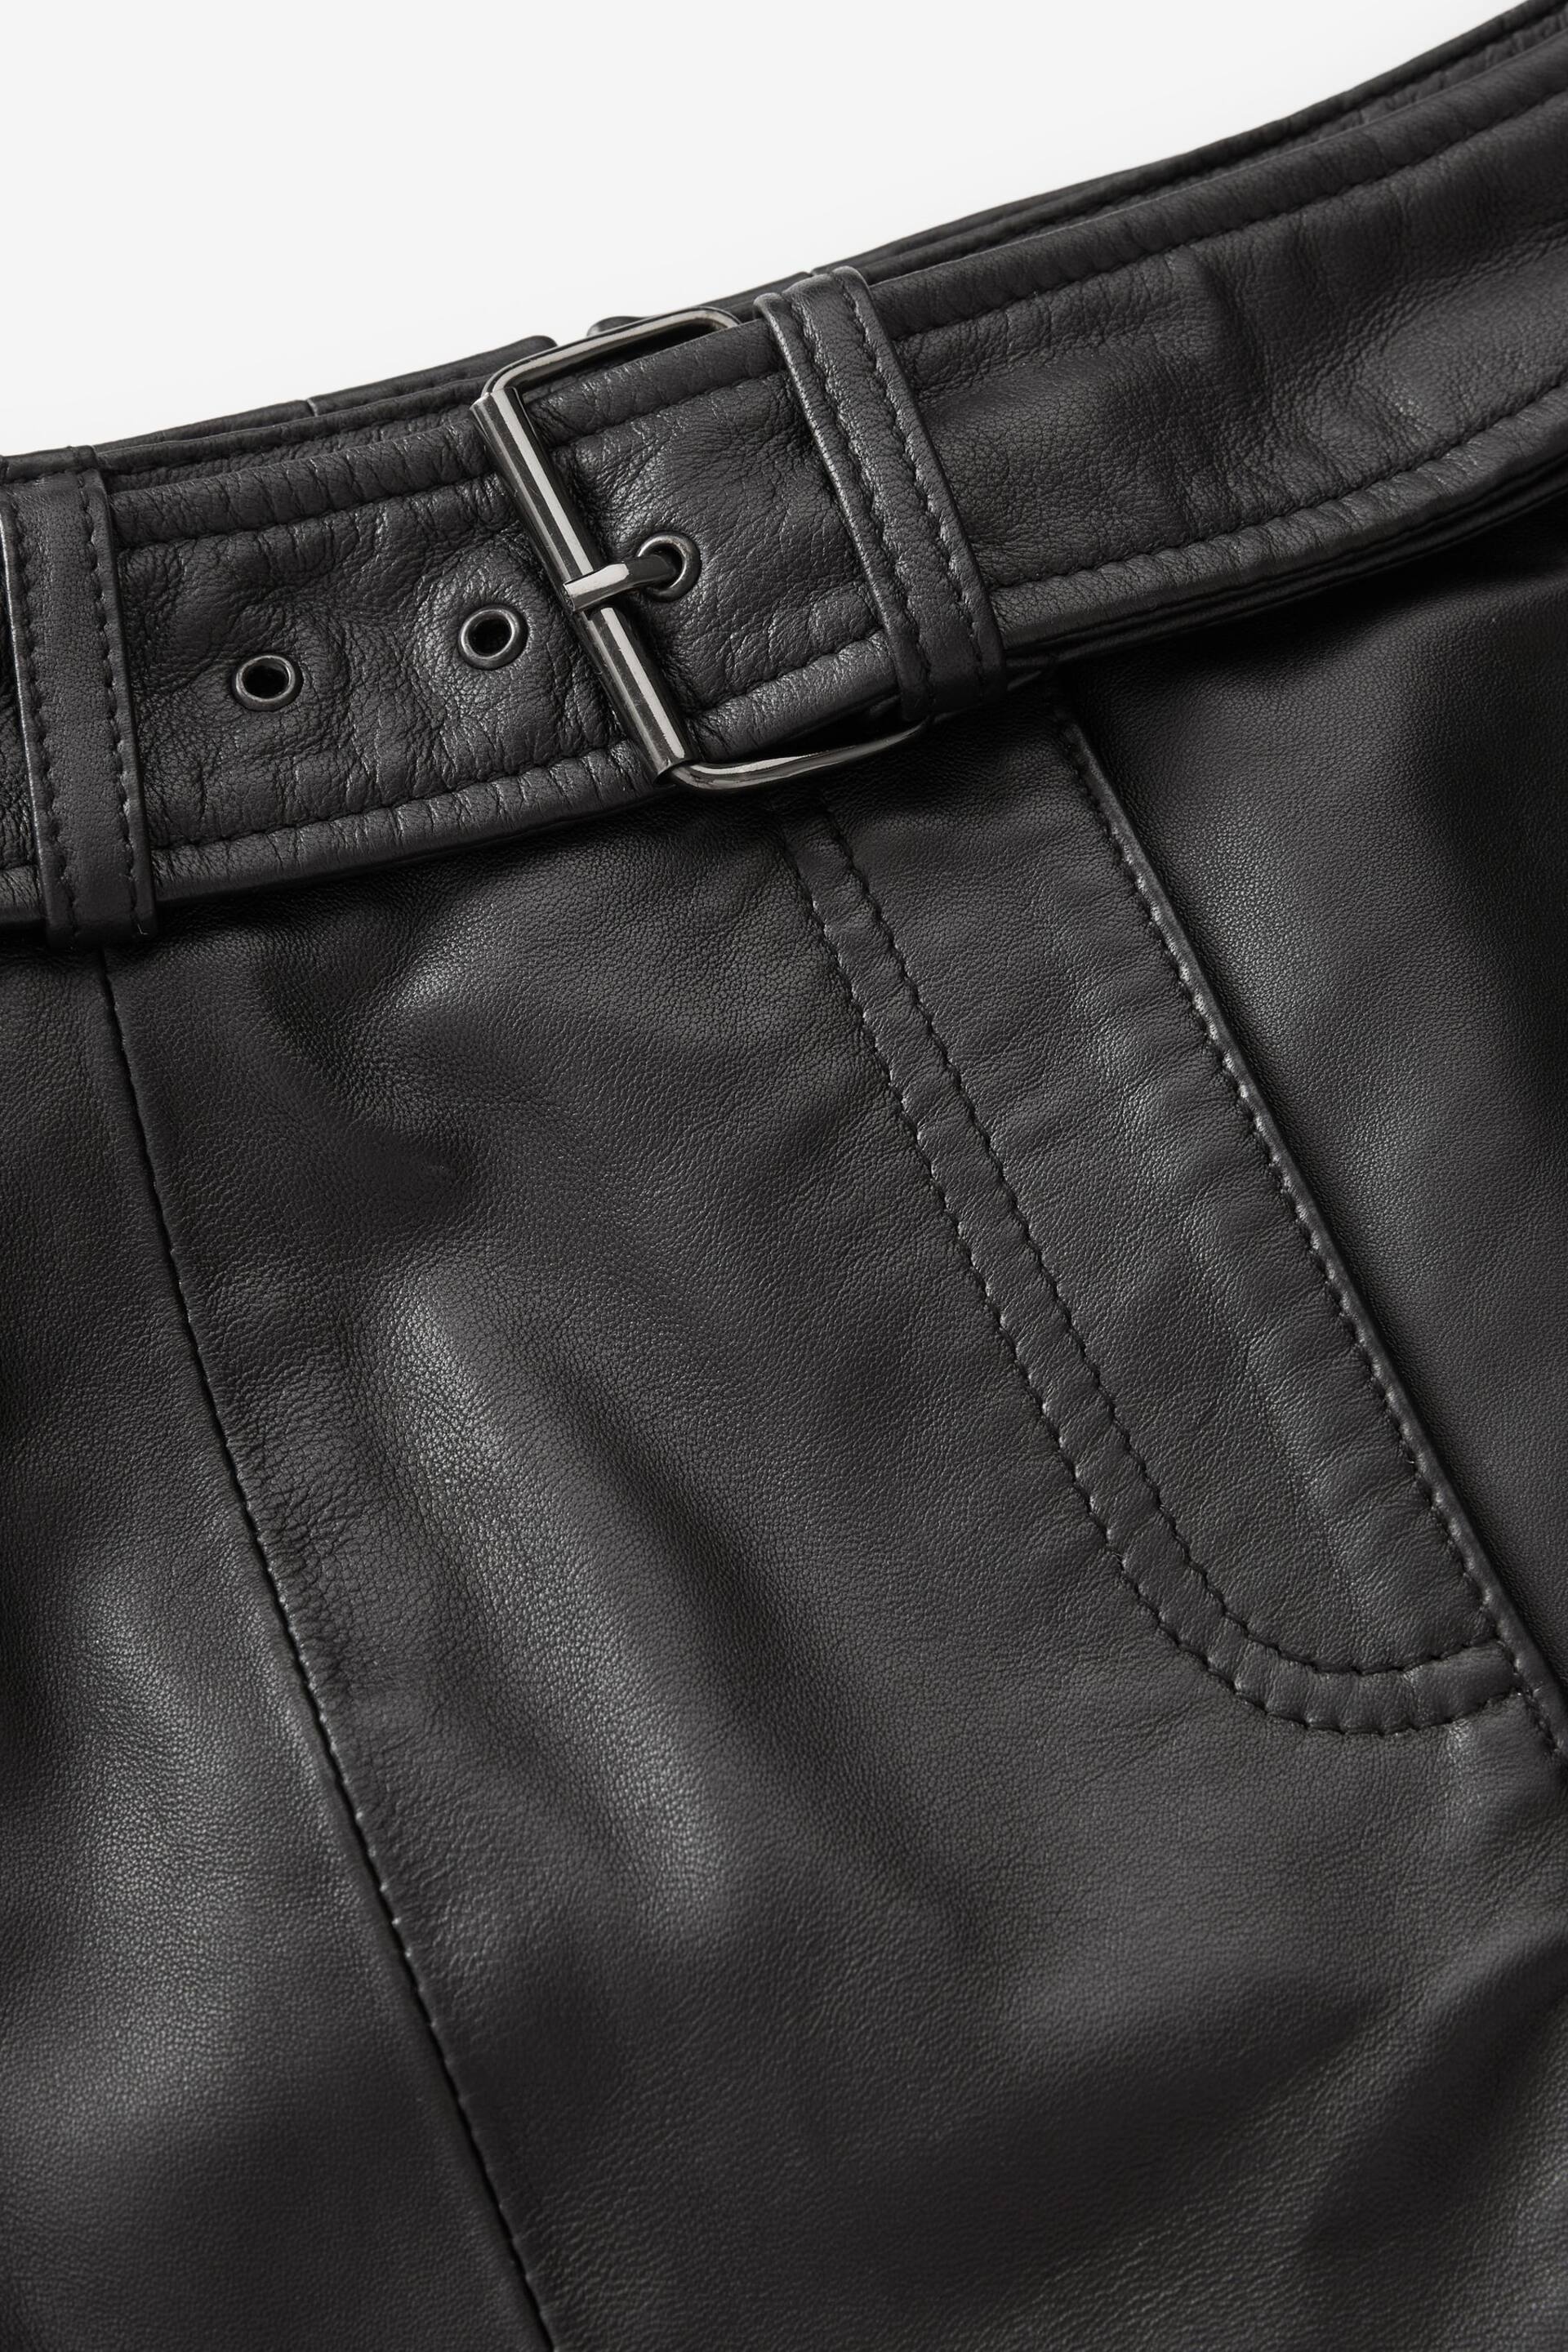 Urban Code Black Leather Front Split Midi Skirt With Removable Belt - Image 7 of 7